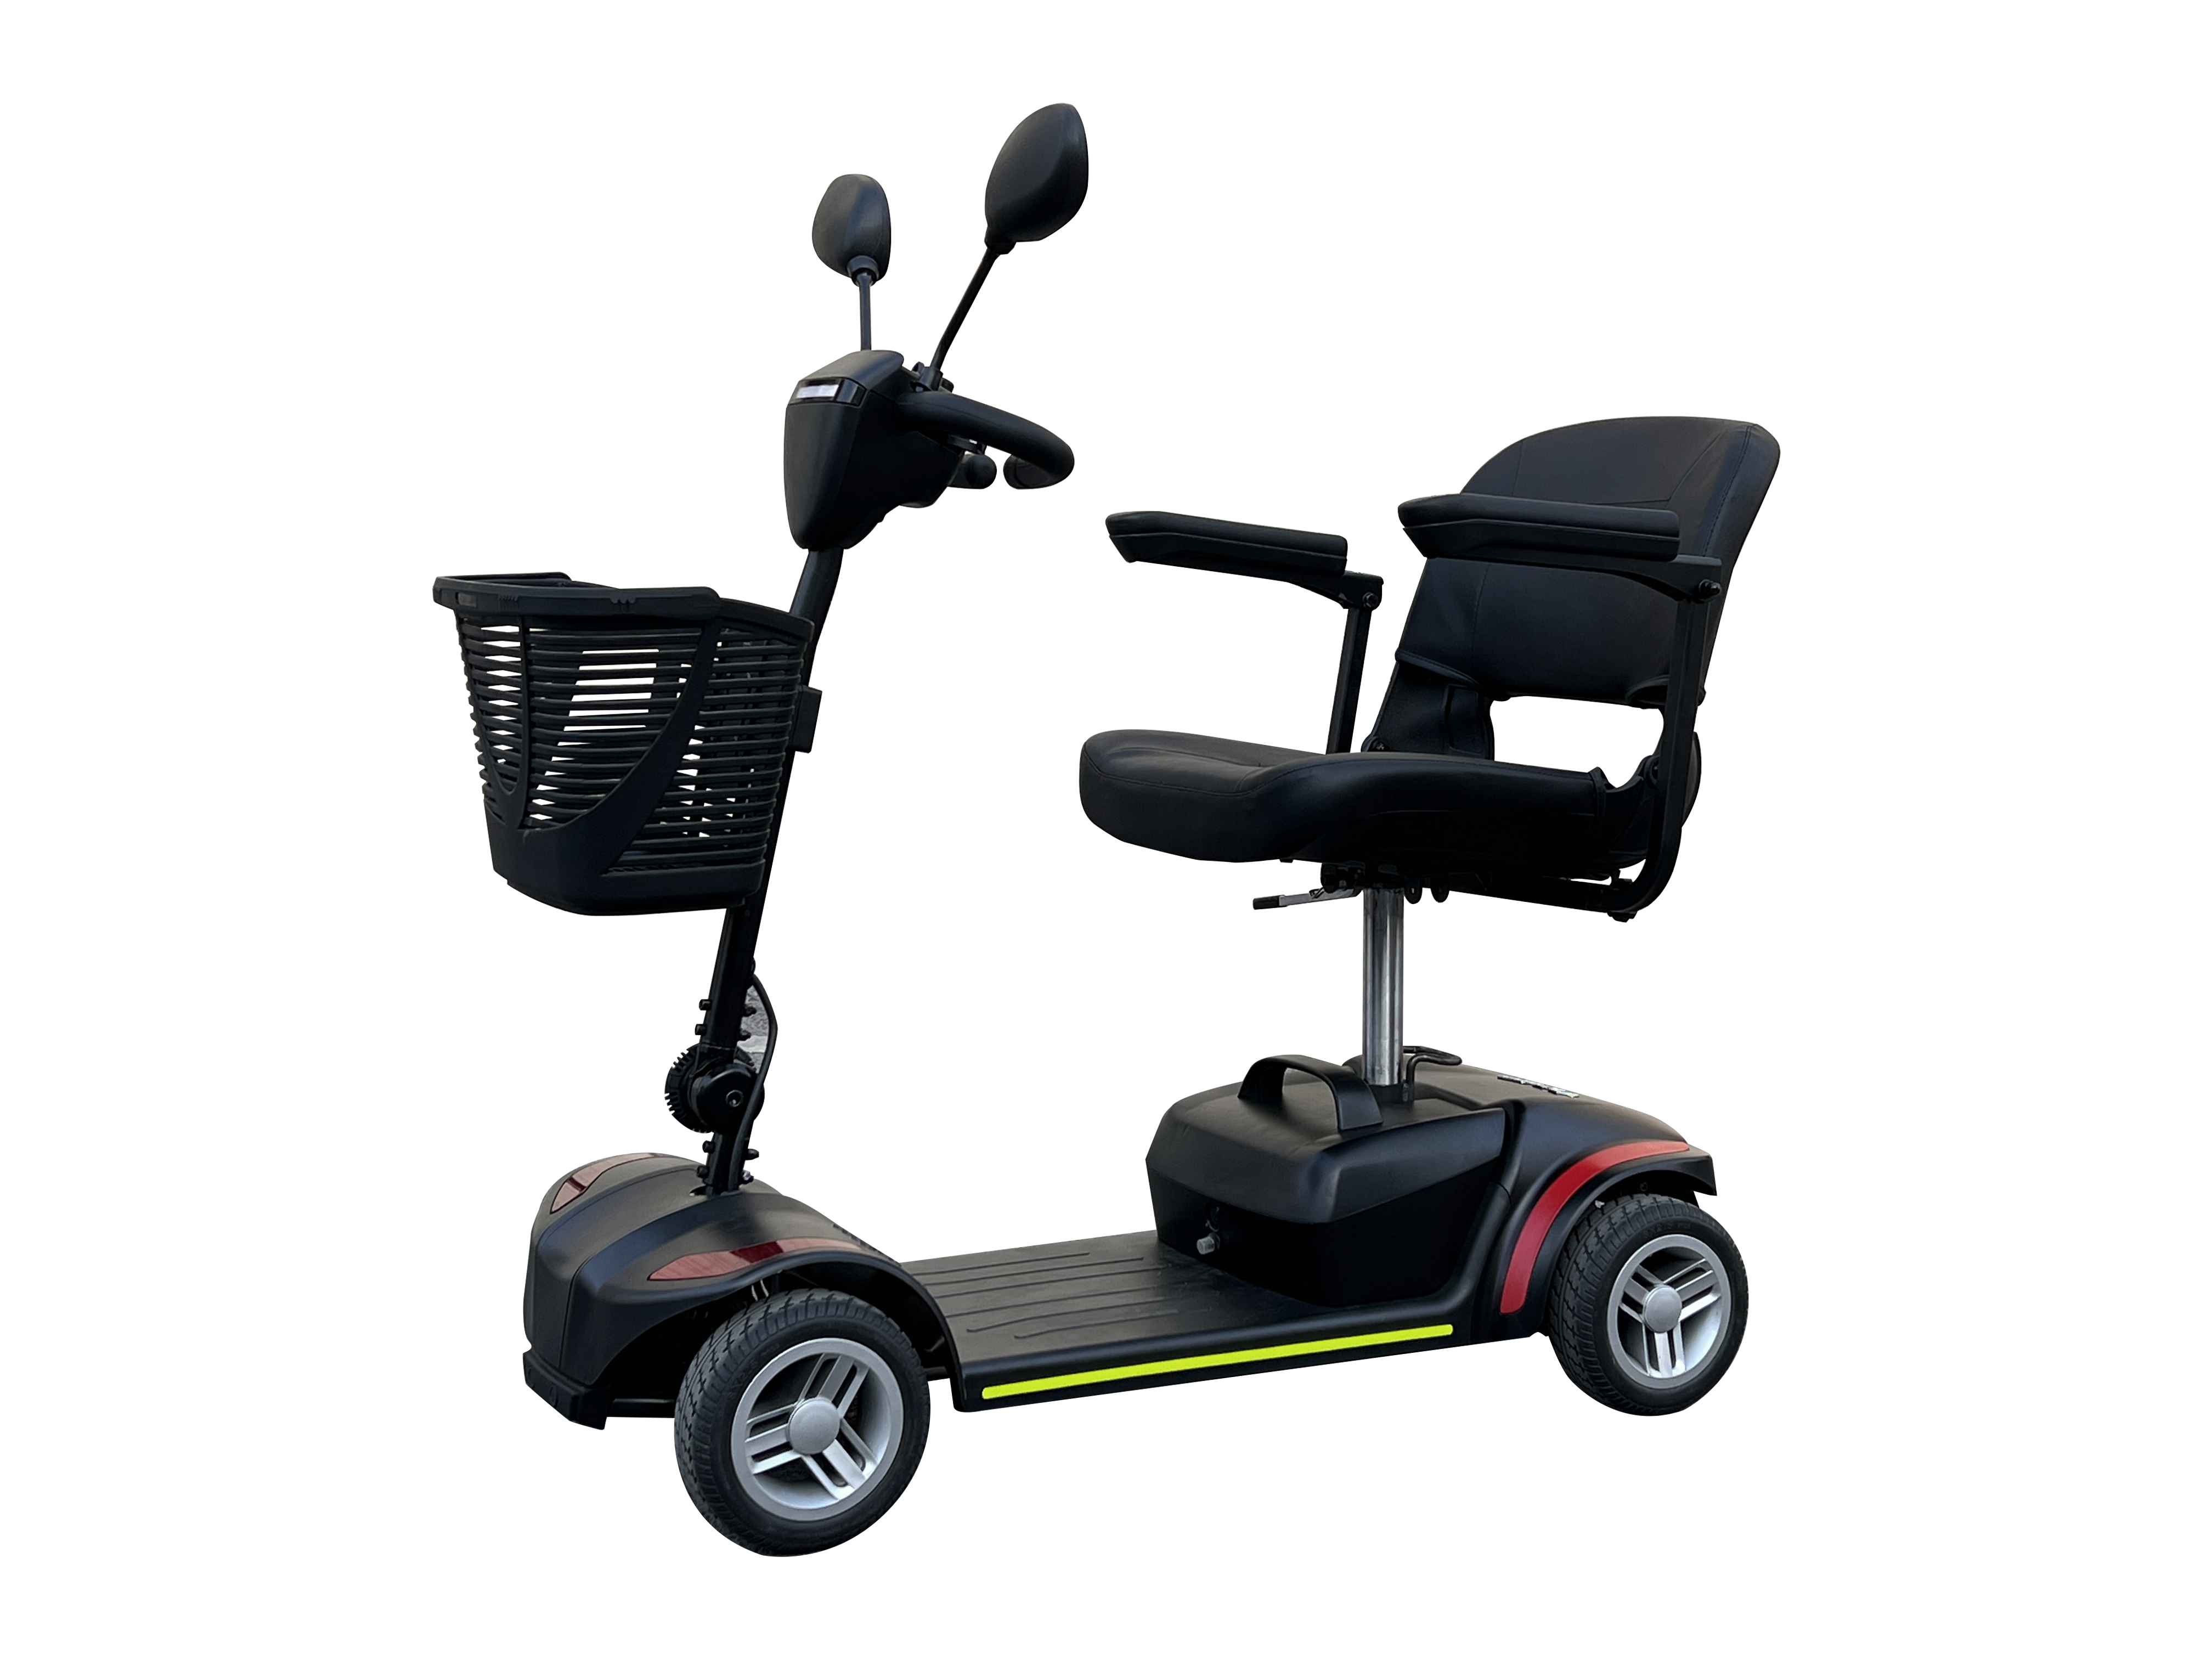 Electric scooter for seniors - a chance to increase mobility